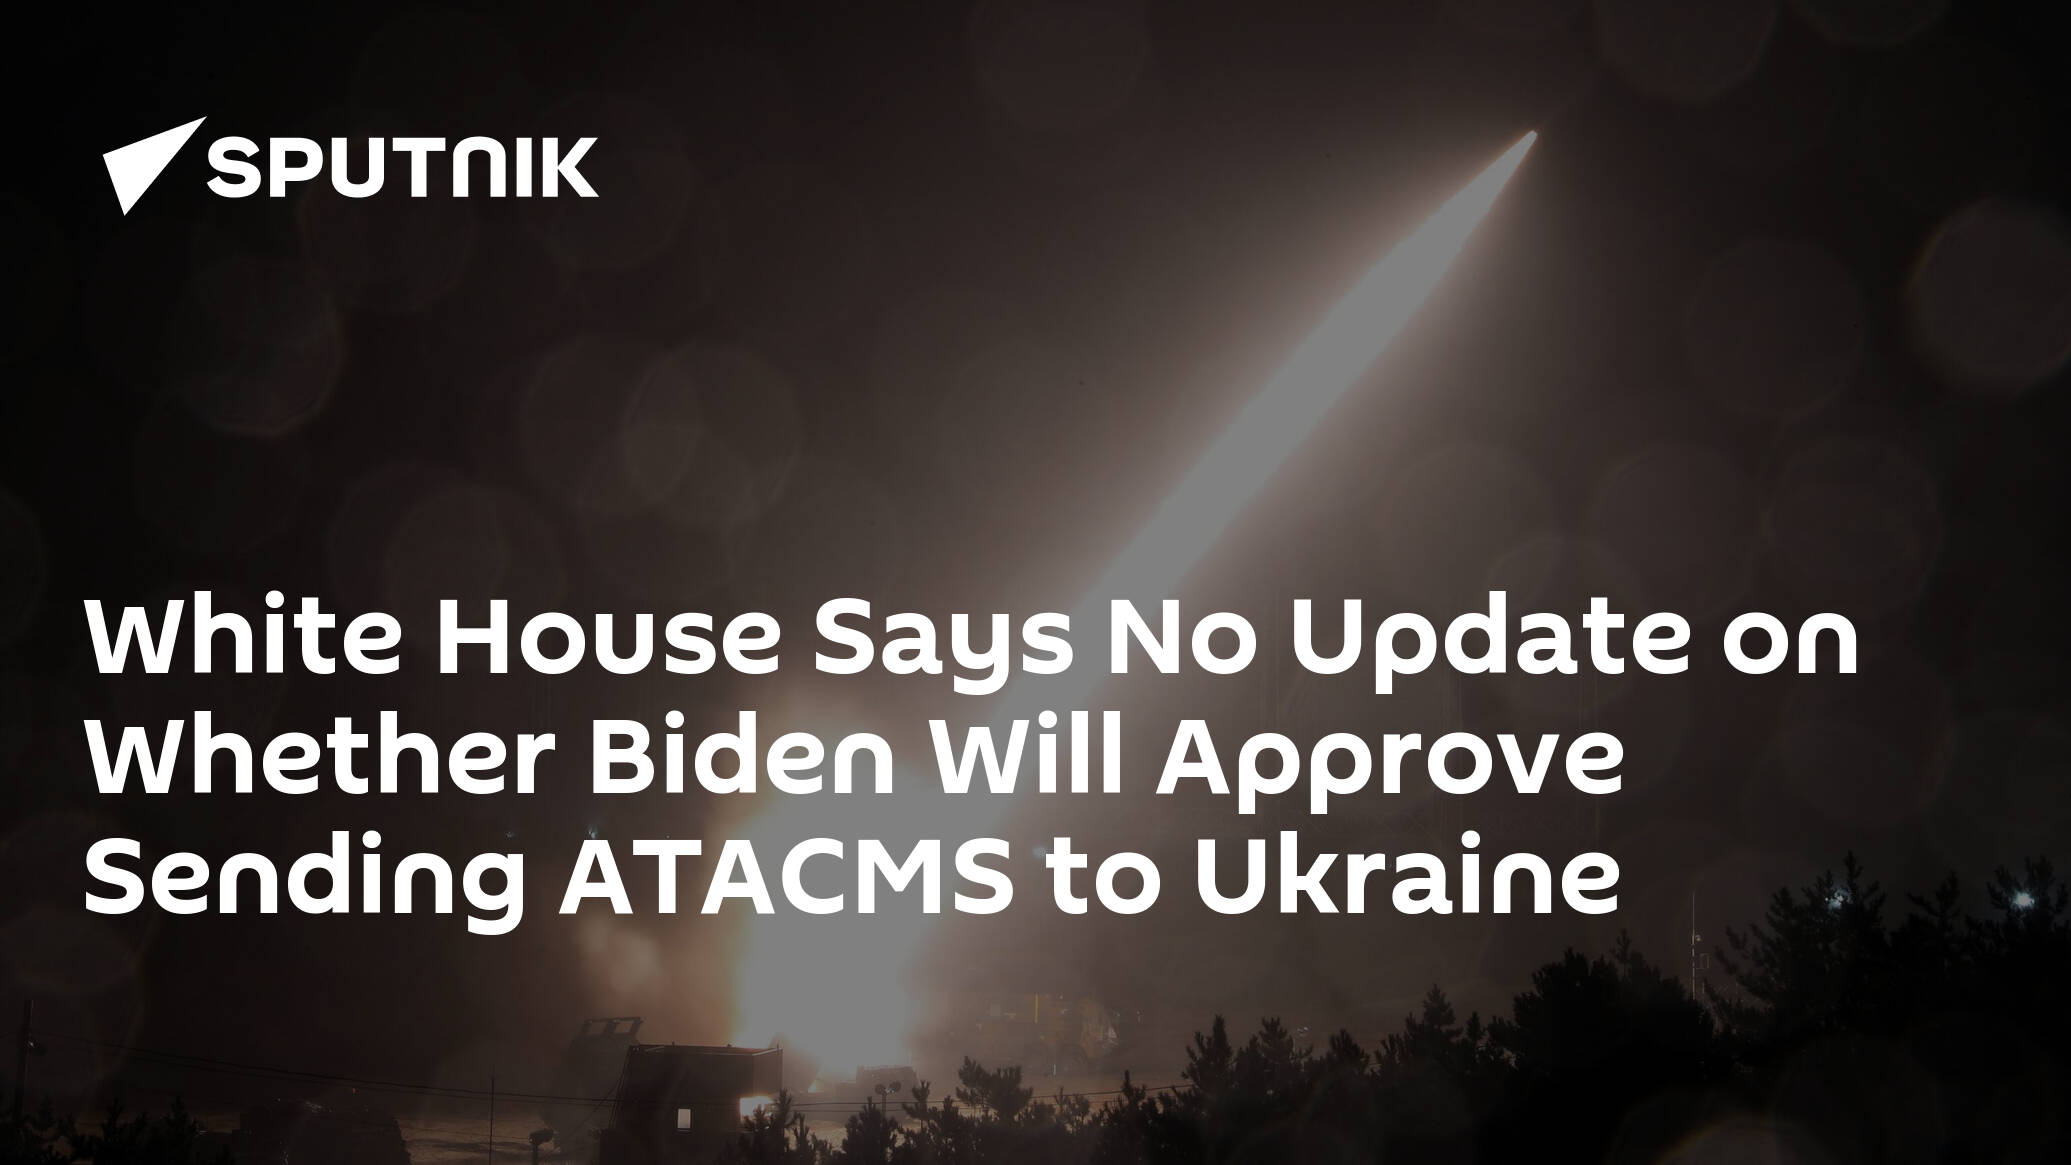 White House Says No Update on Whether Biden Will Approve Sending ATACMS to Ukraine